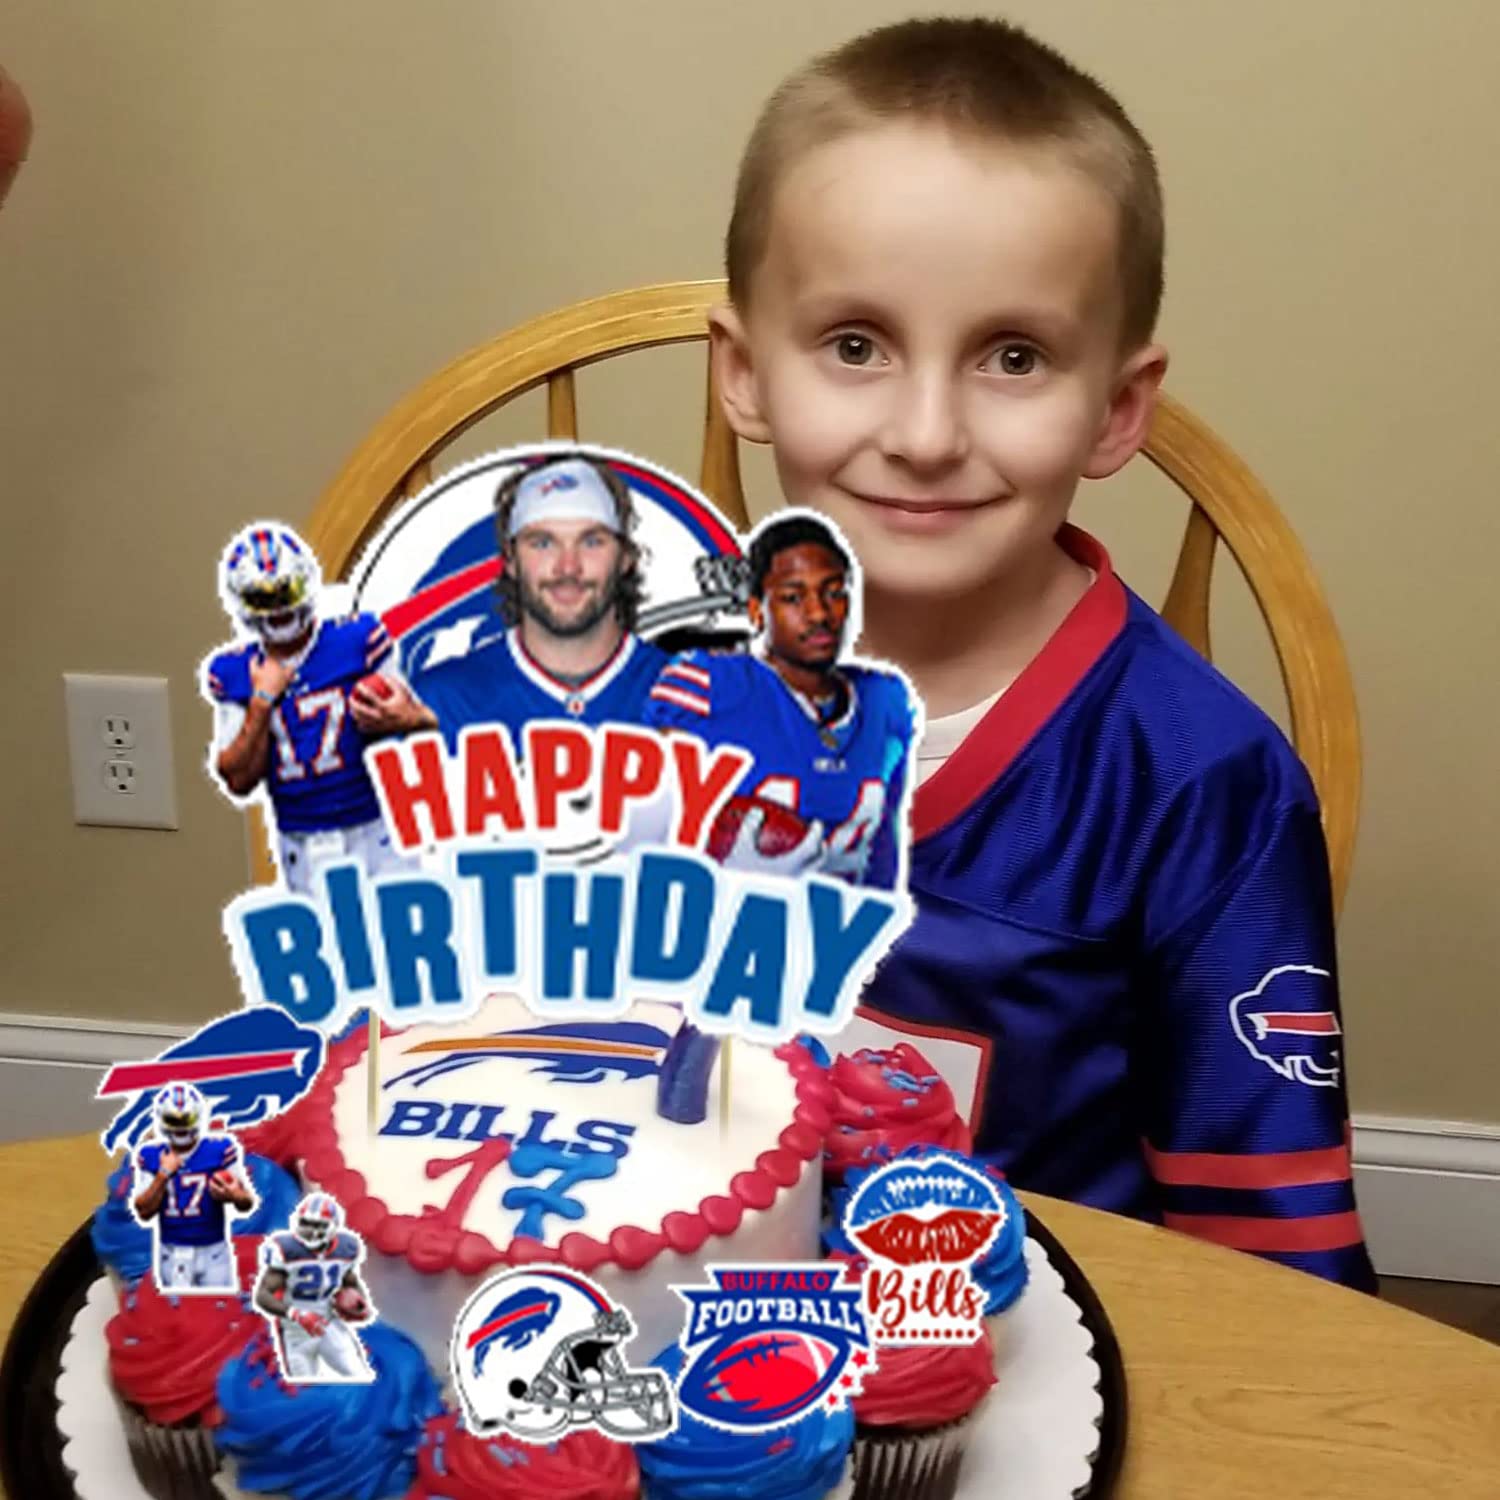 Bills Birthday Party Decorations,Buffalo Party Supplies,Buffalo Football Supplies Includes Happy Birthday Banner, Balloons, Cupcake Toppers, Cake Topper for Boys And Girls